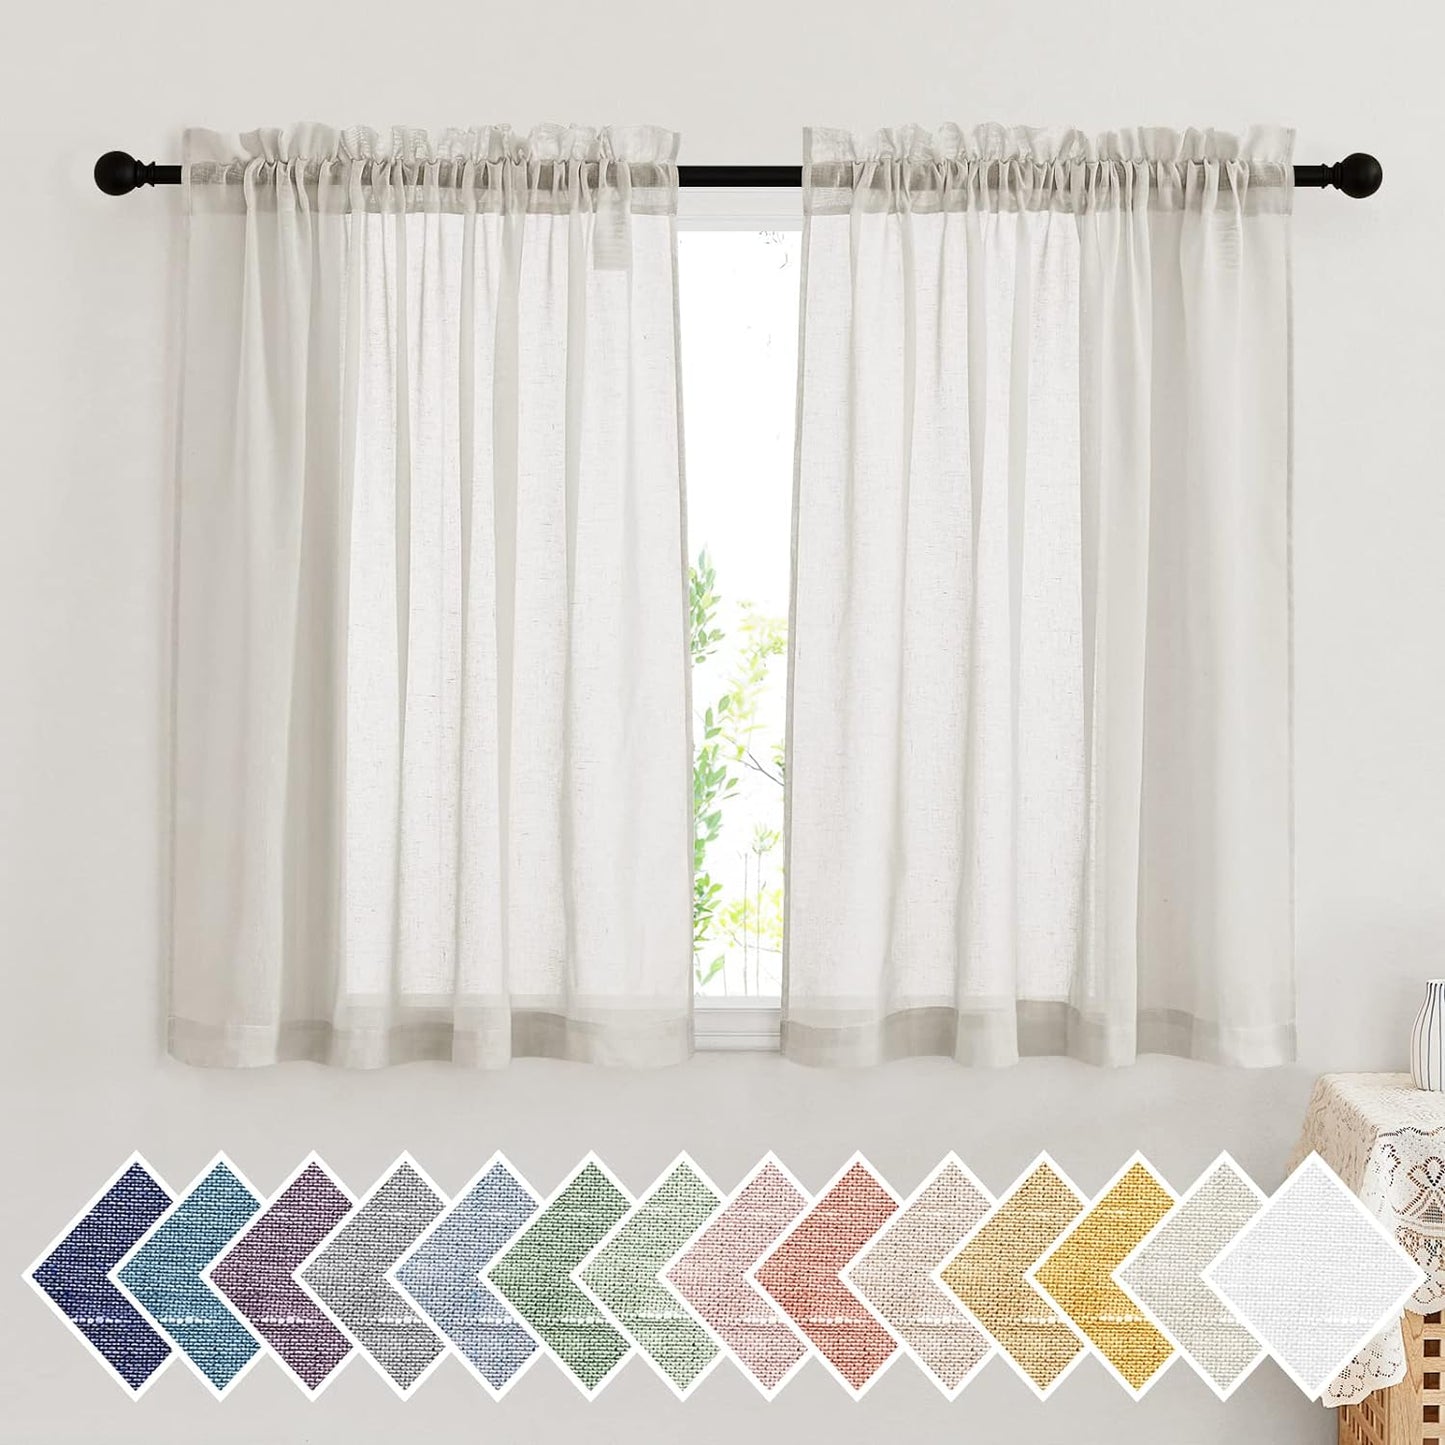 NICETOWN Semi Sheer White Curtains 84 Inch Long, Rod Pocket Sheer Linen Curtains & Drapes Balance Privacy & Light Panels for Bedroom/Living Room, W52 X L84, 2 Panels  NICETOWN Natural W52 X L45 